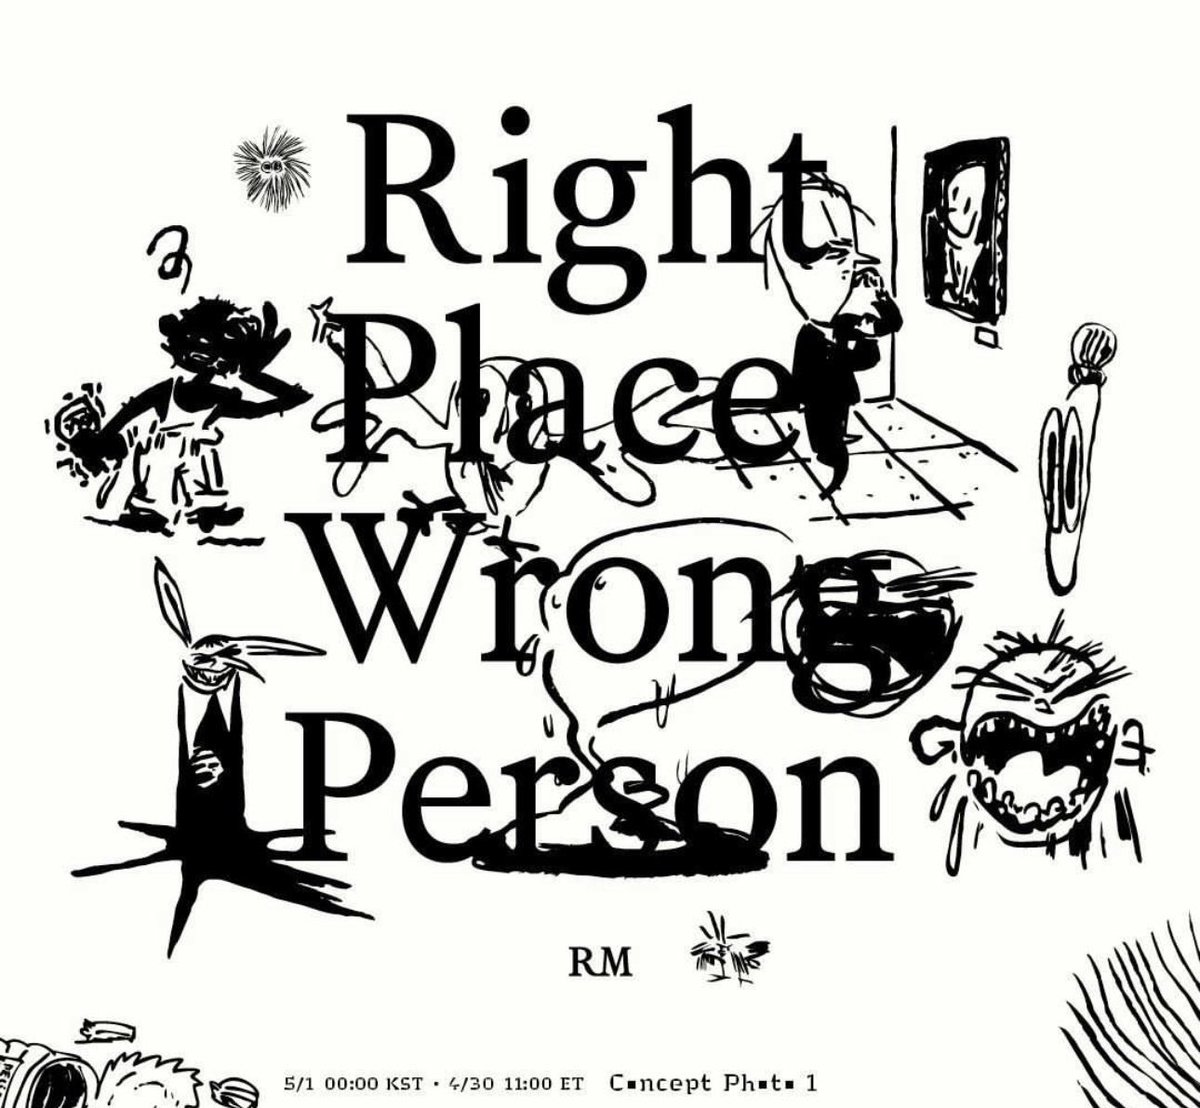 RM IS COMING RPWP CONCEPT PHOTO 1 RIGHT PLACE WRONG PERSON #RM #RightPlaceWrongPerson